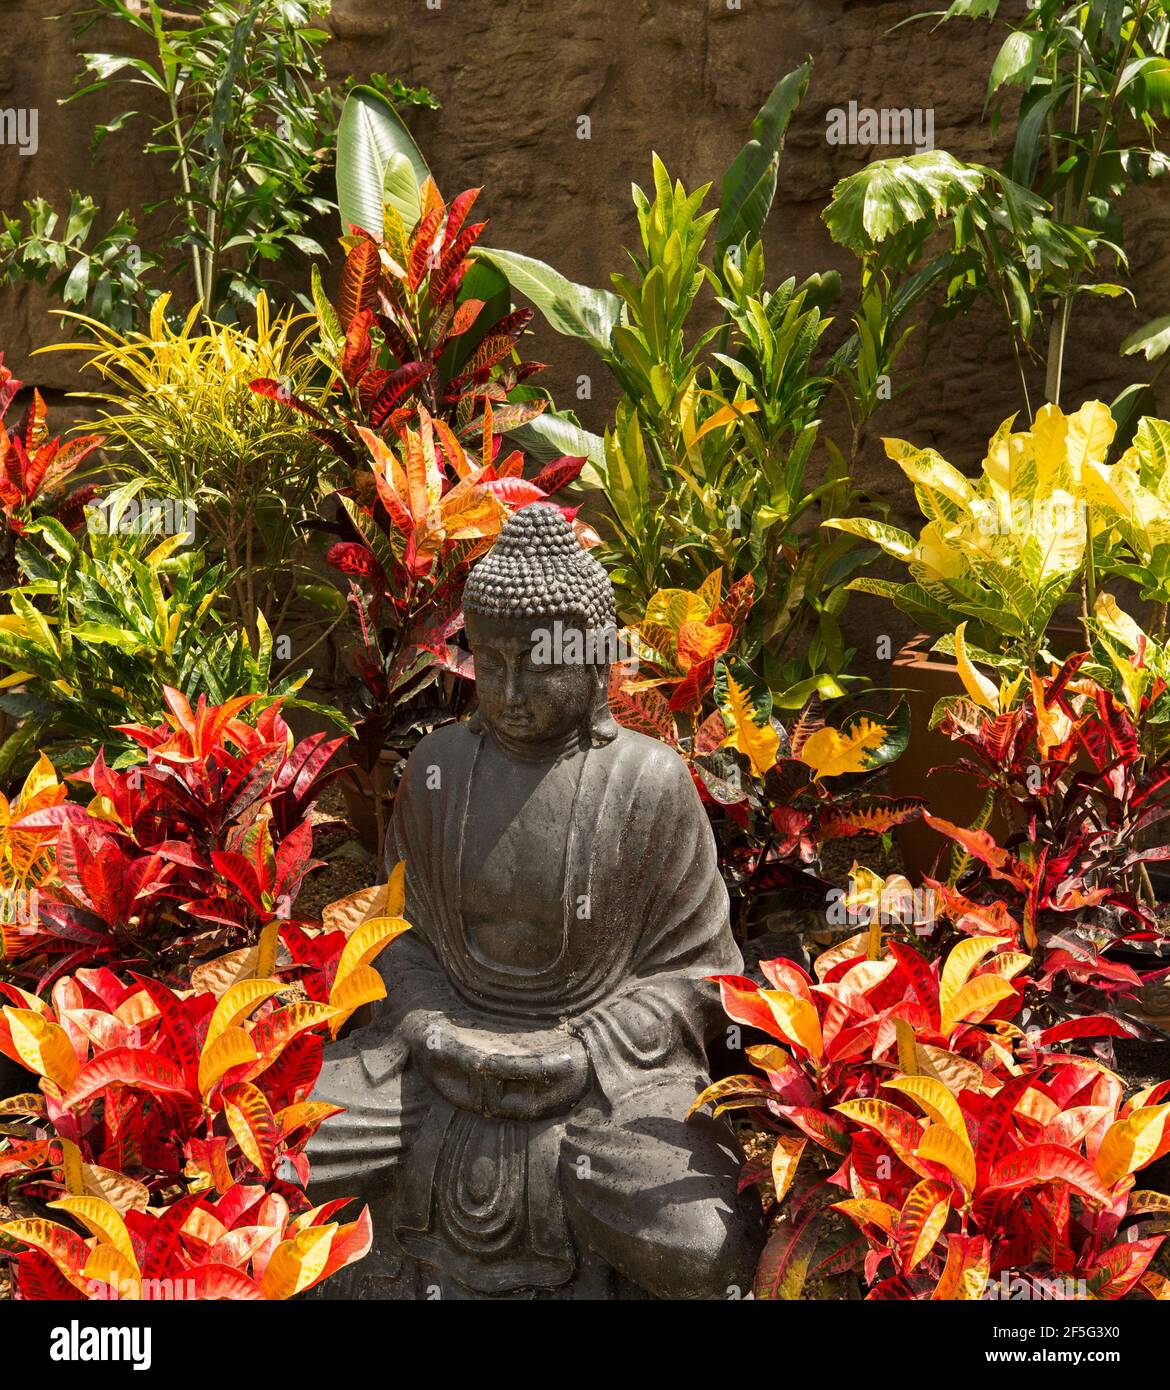 Crotons, Codiaeum variegatum cultivars, shrubs with bright red, green and yellow variegated foliage, surrounding a garden statue of Buddha Stock Photo